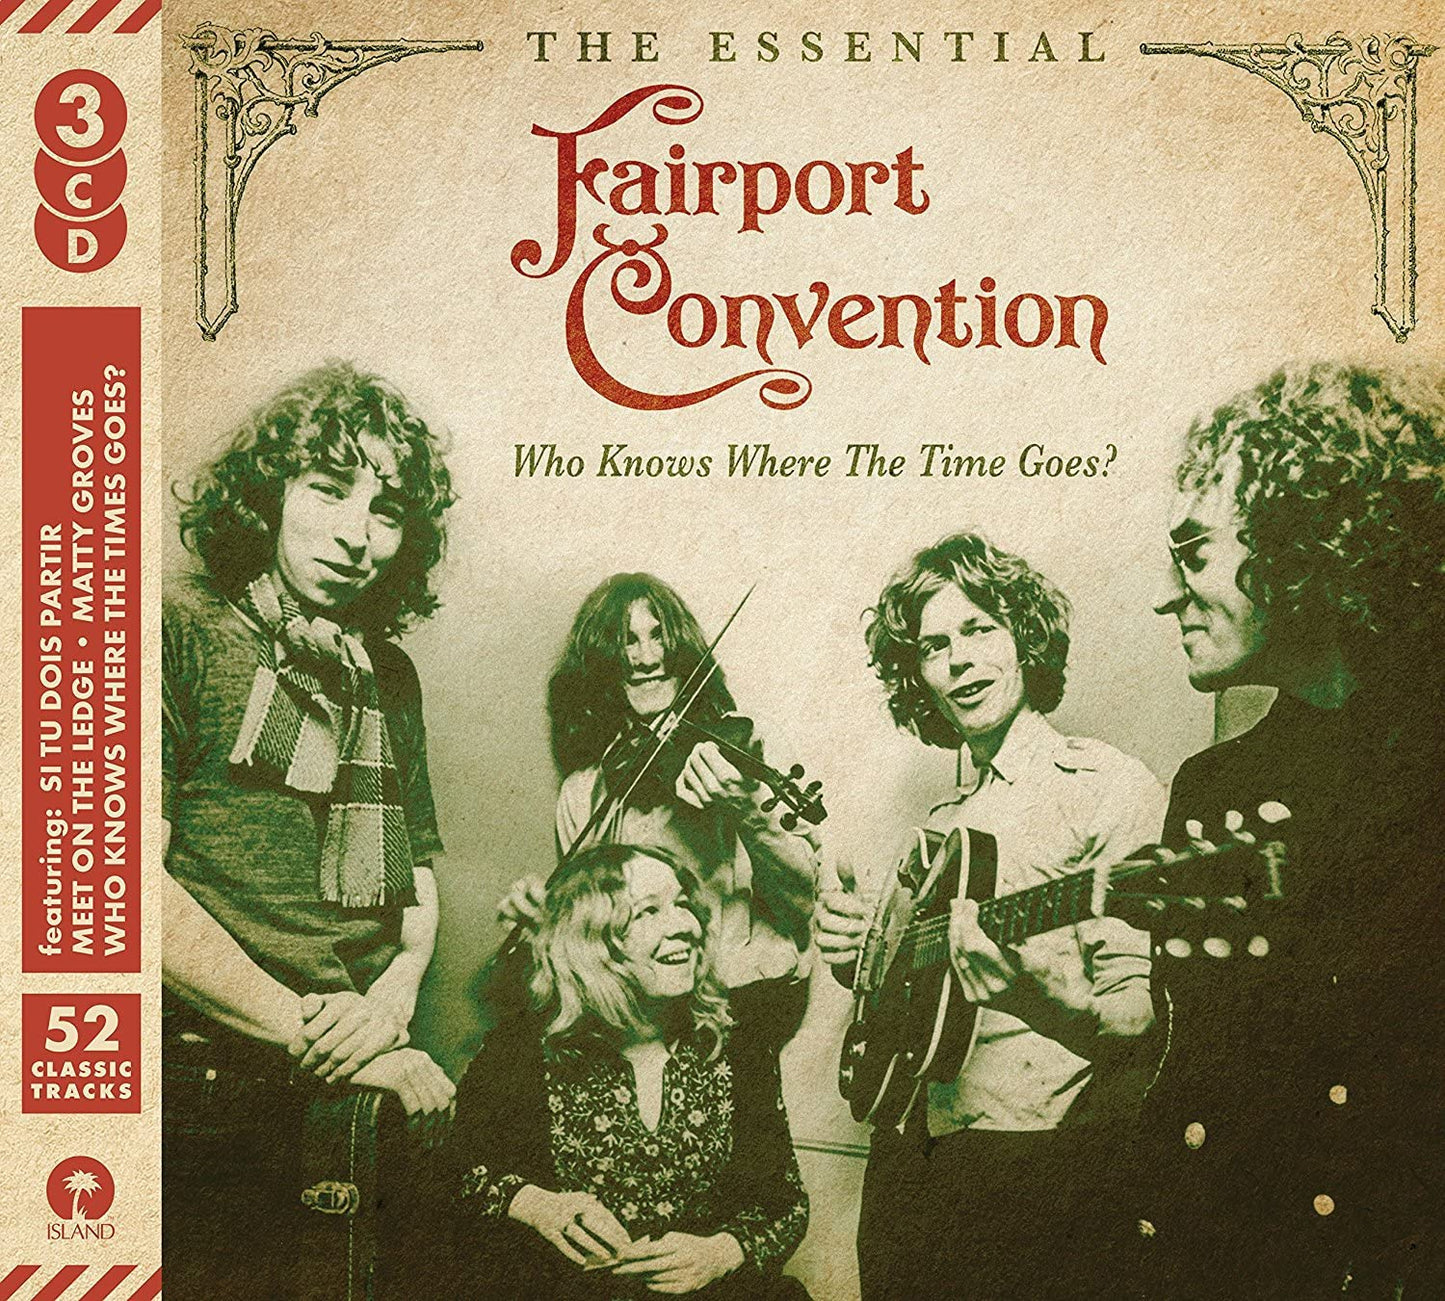 Fairoort Convention, The/The Essential (3CD) [CD]